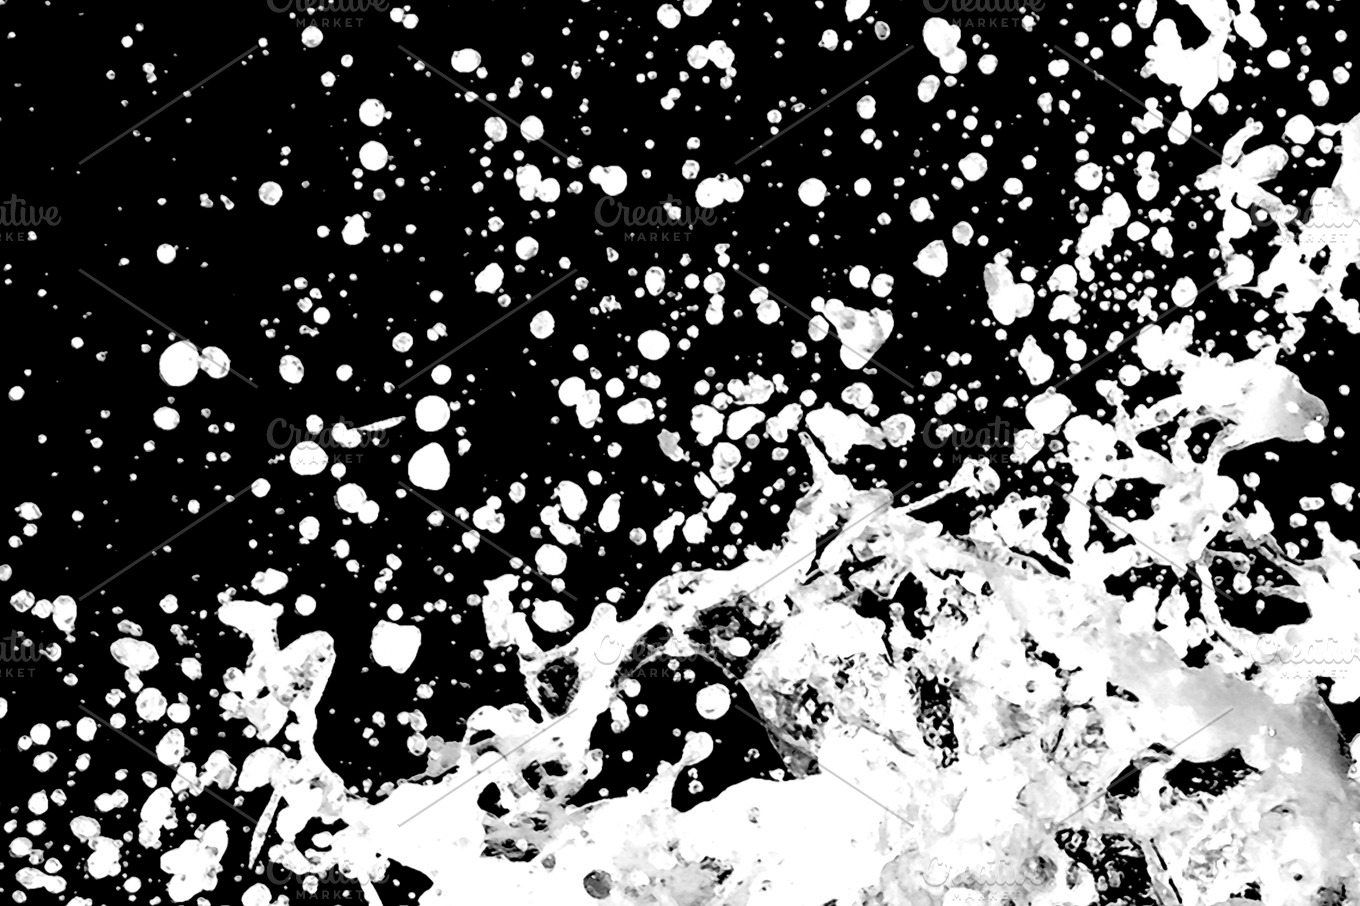 Black And White Splash Background Texture High Quality Abstract Stock